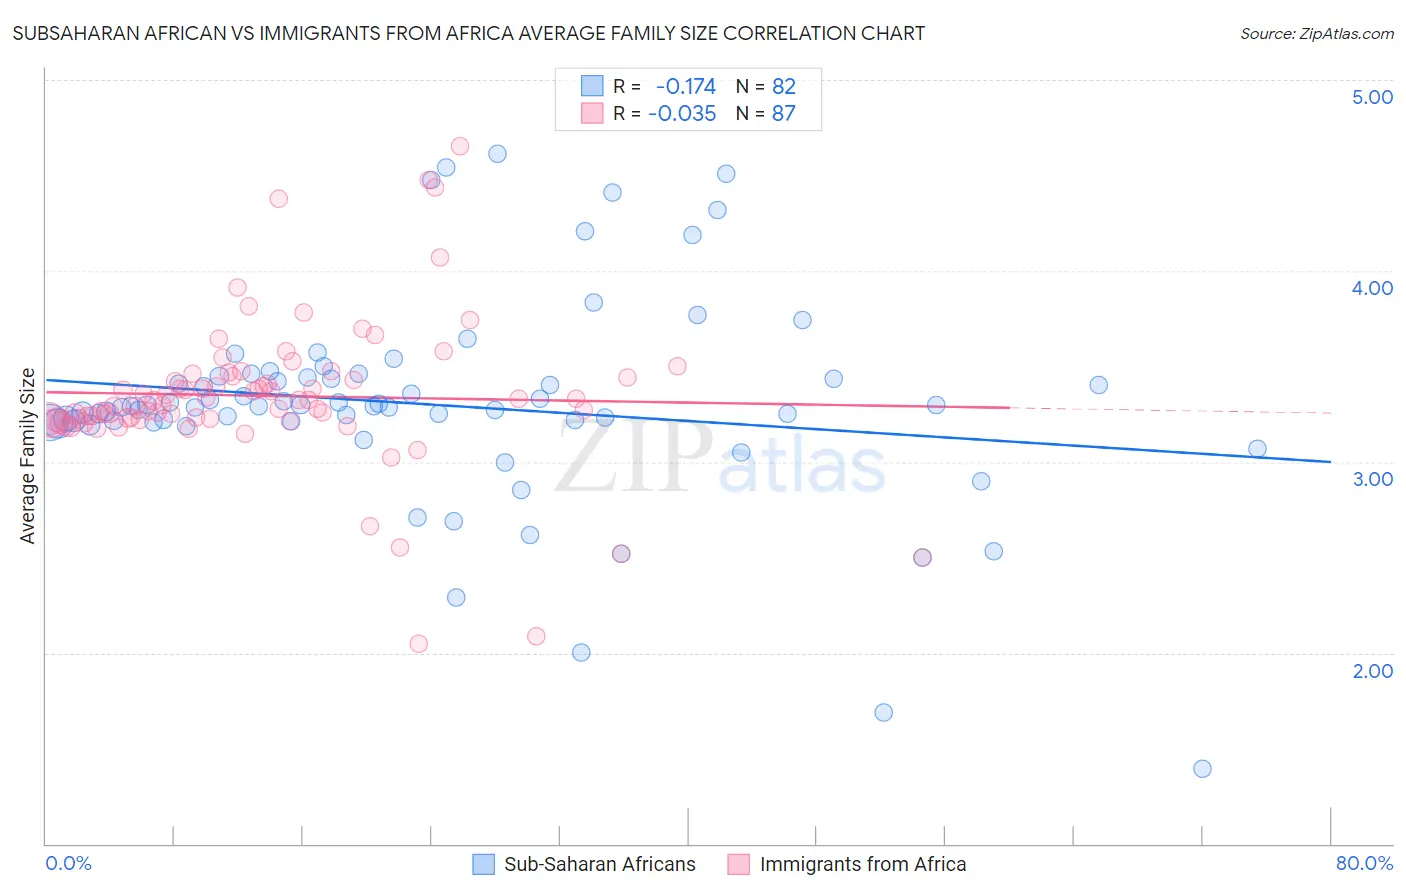 Subsaharan African vs Immigrants from Africa Average Family Size